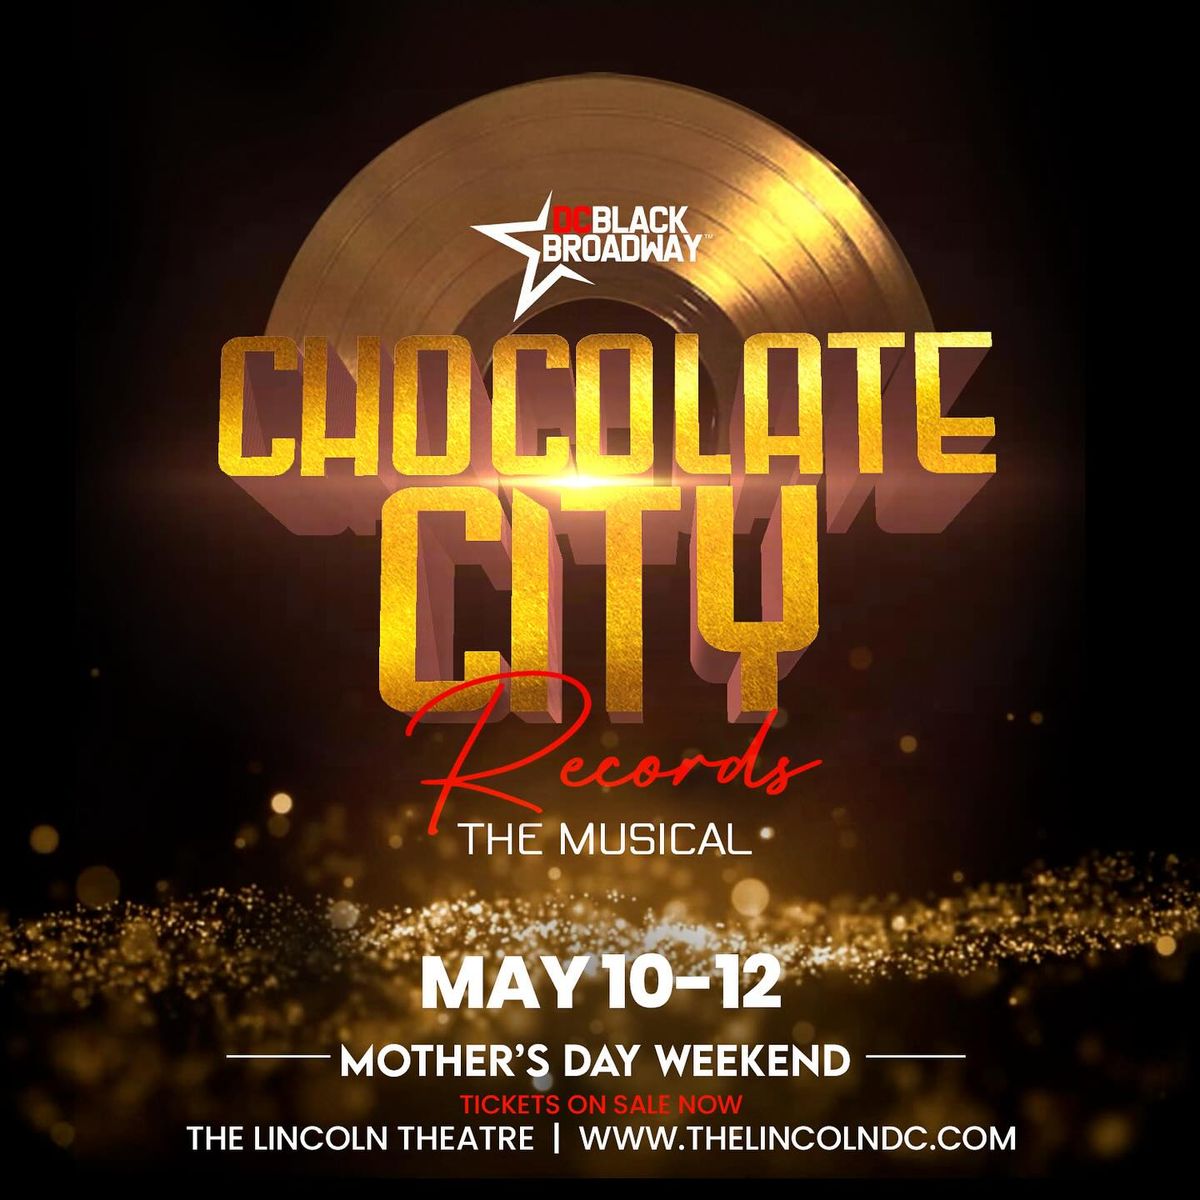 Chocolate City Records, The Musical (Stage Play)